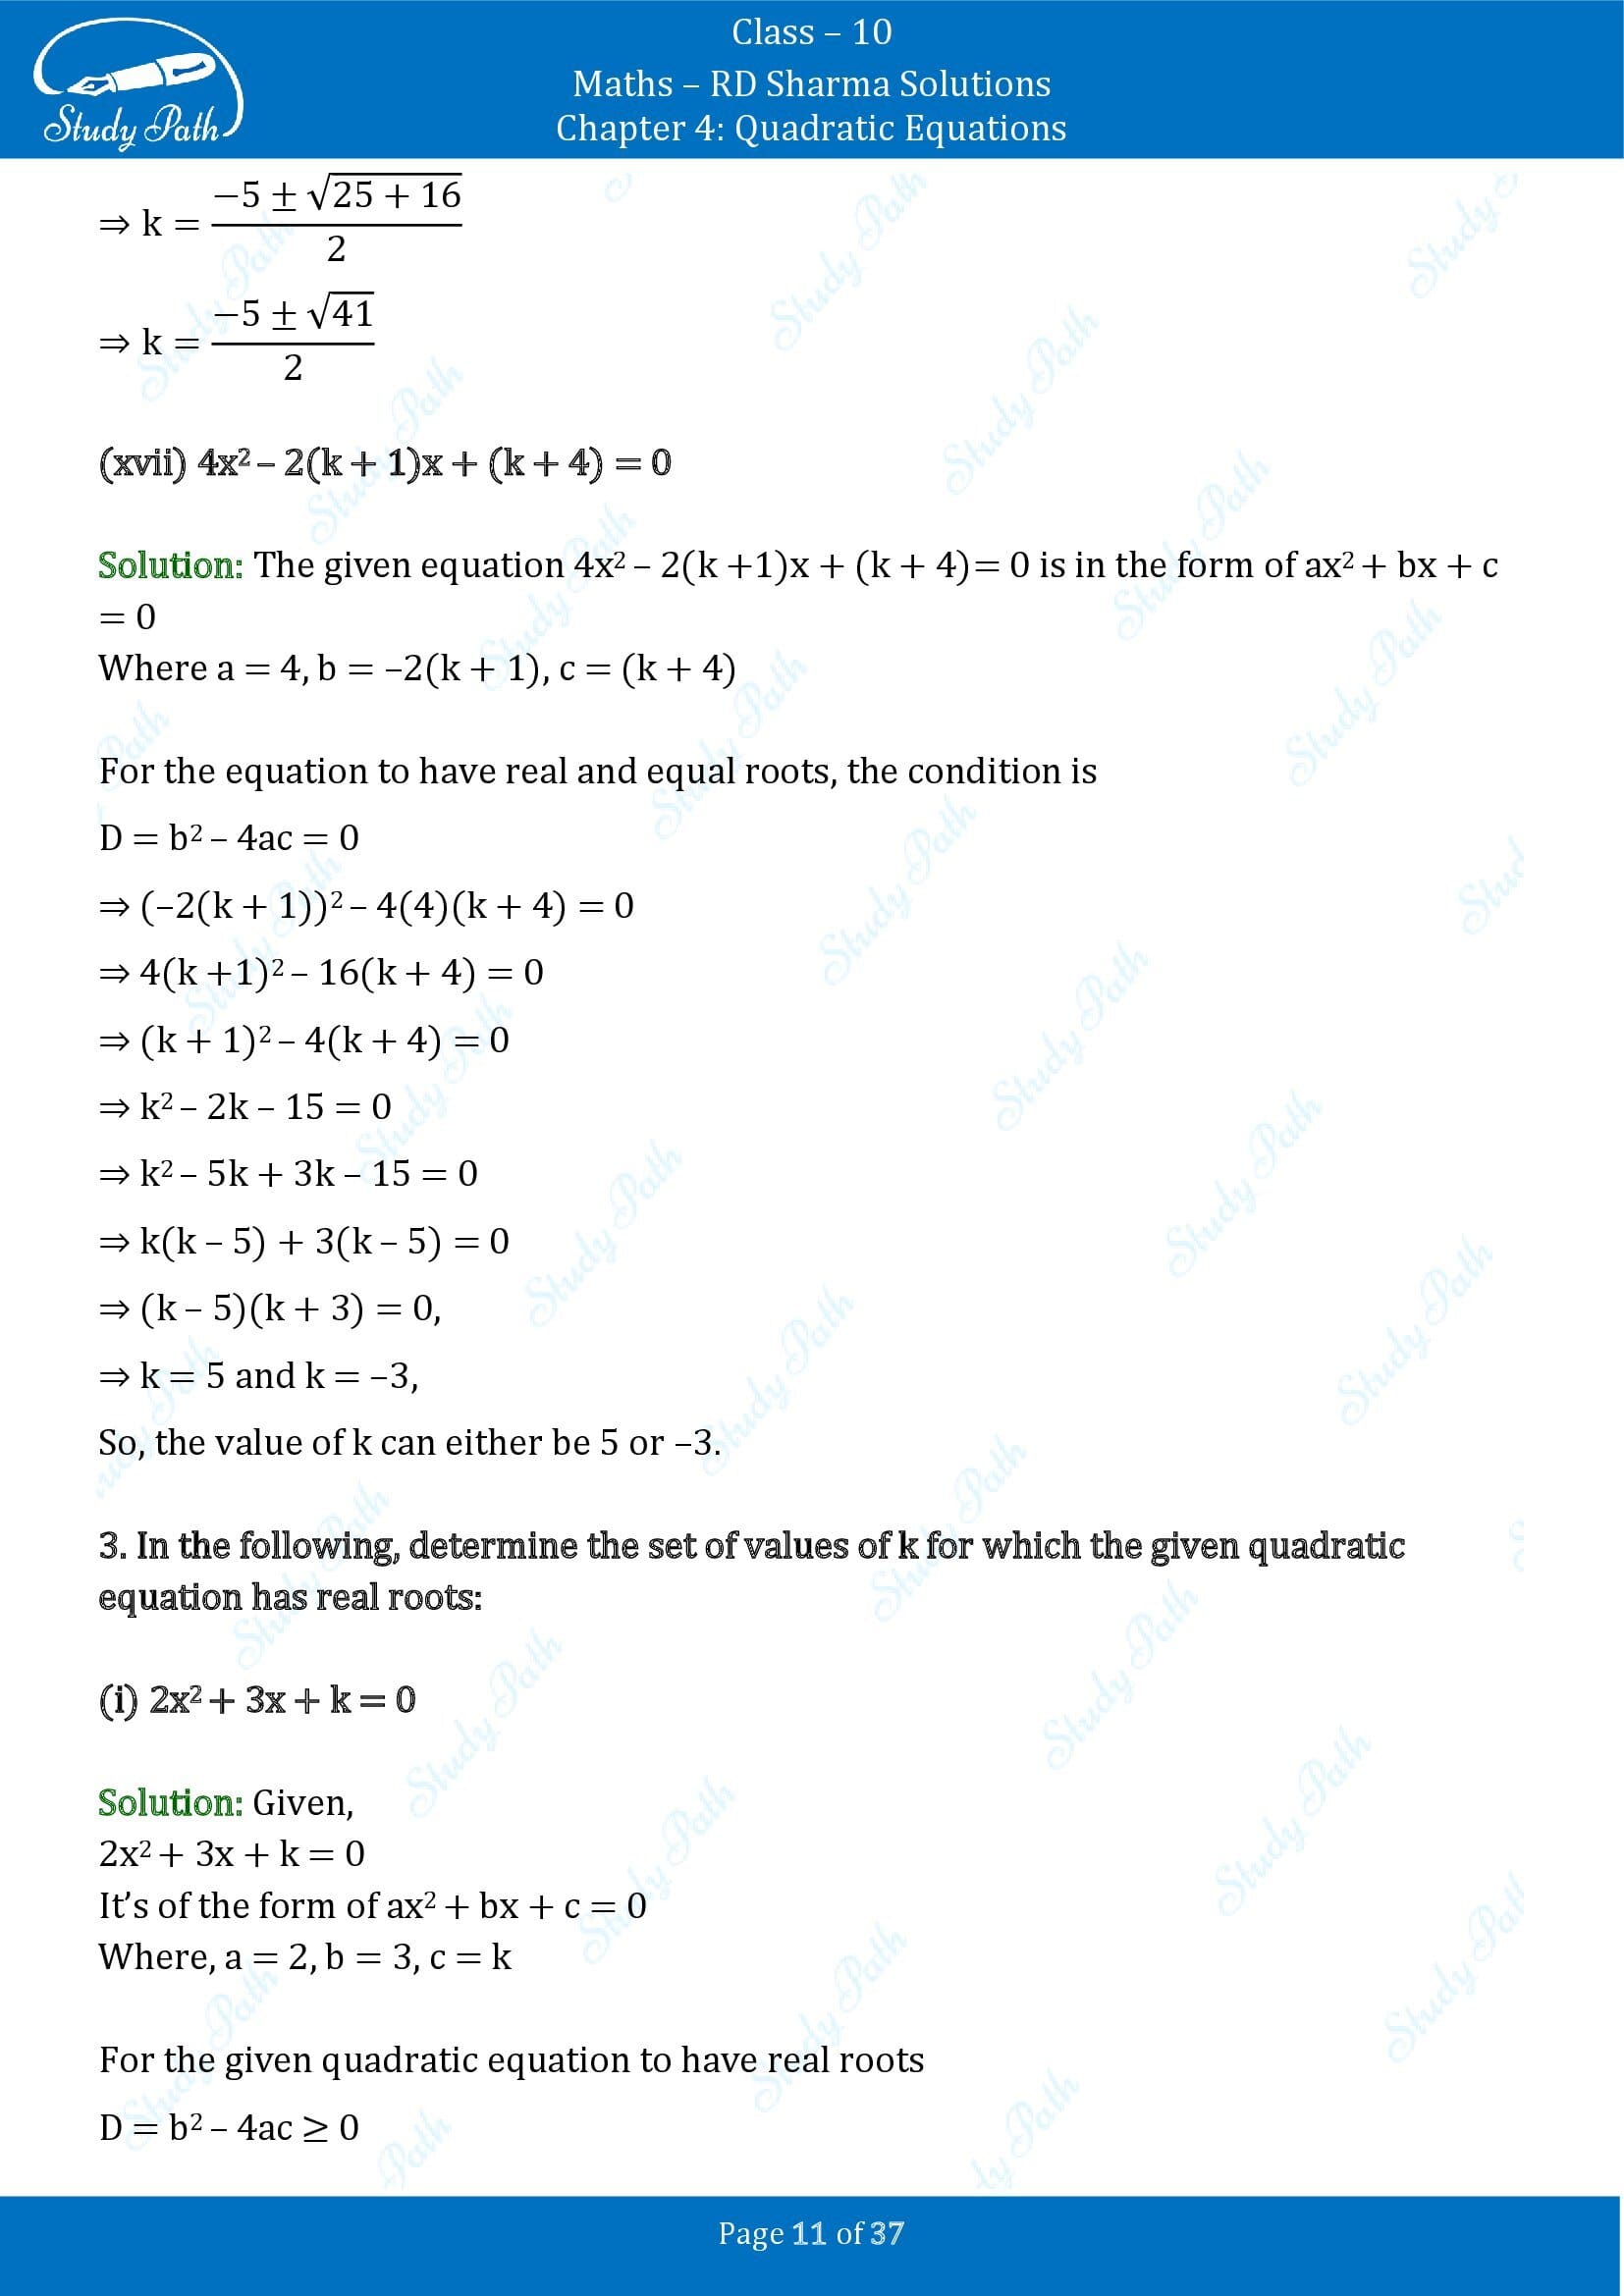 RD Sharma Solutions Class 10 Chapter 4 Quadratic Equations Exercise 4.6 00011